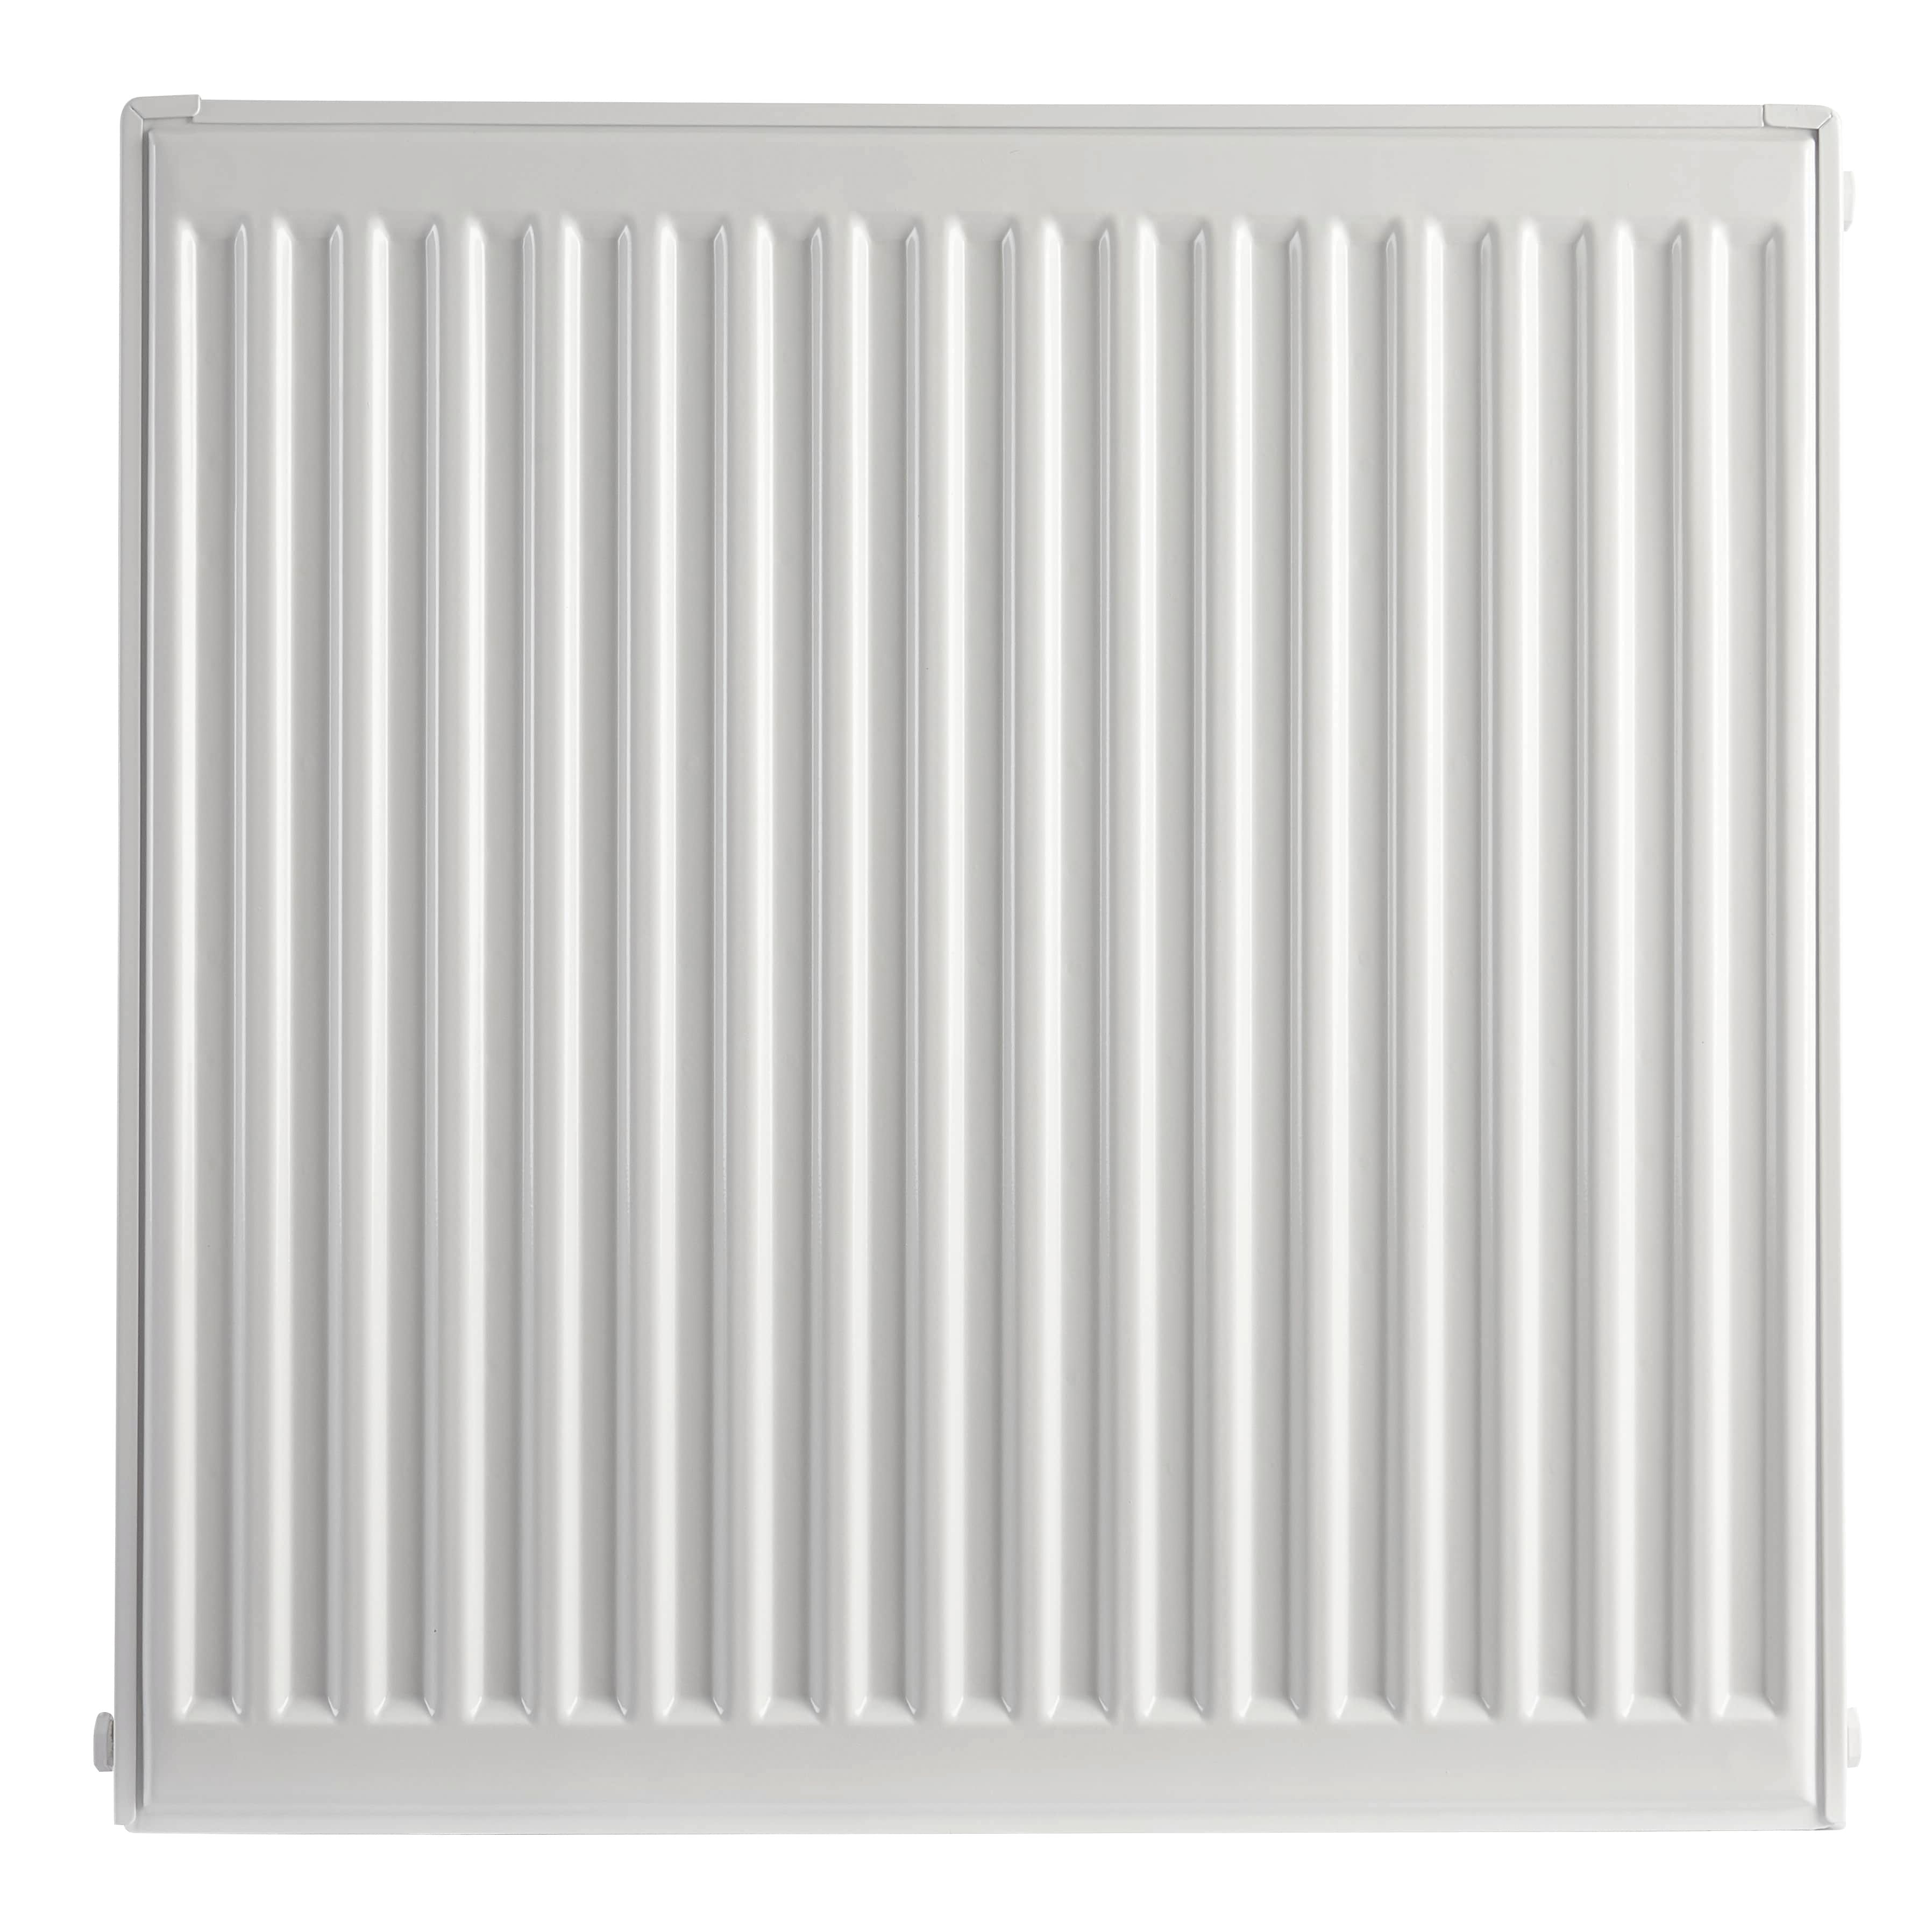 Image of Homeline by Stelrad 500 x 400mm Type 21 Double Panel Plus Single Convector Radiator